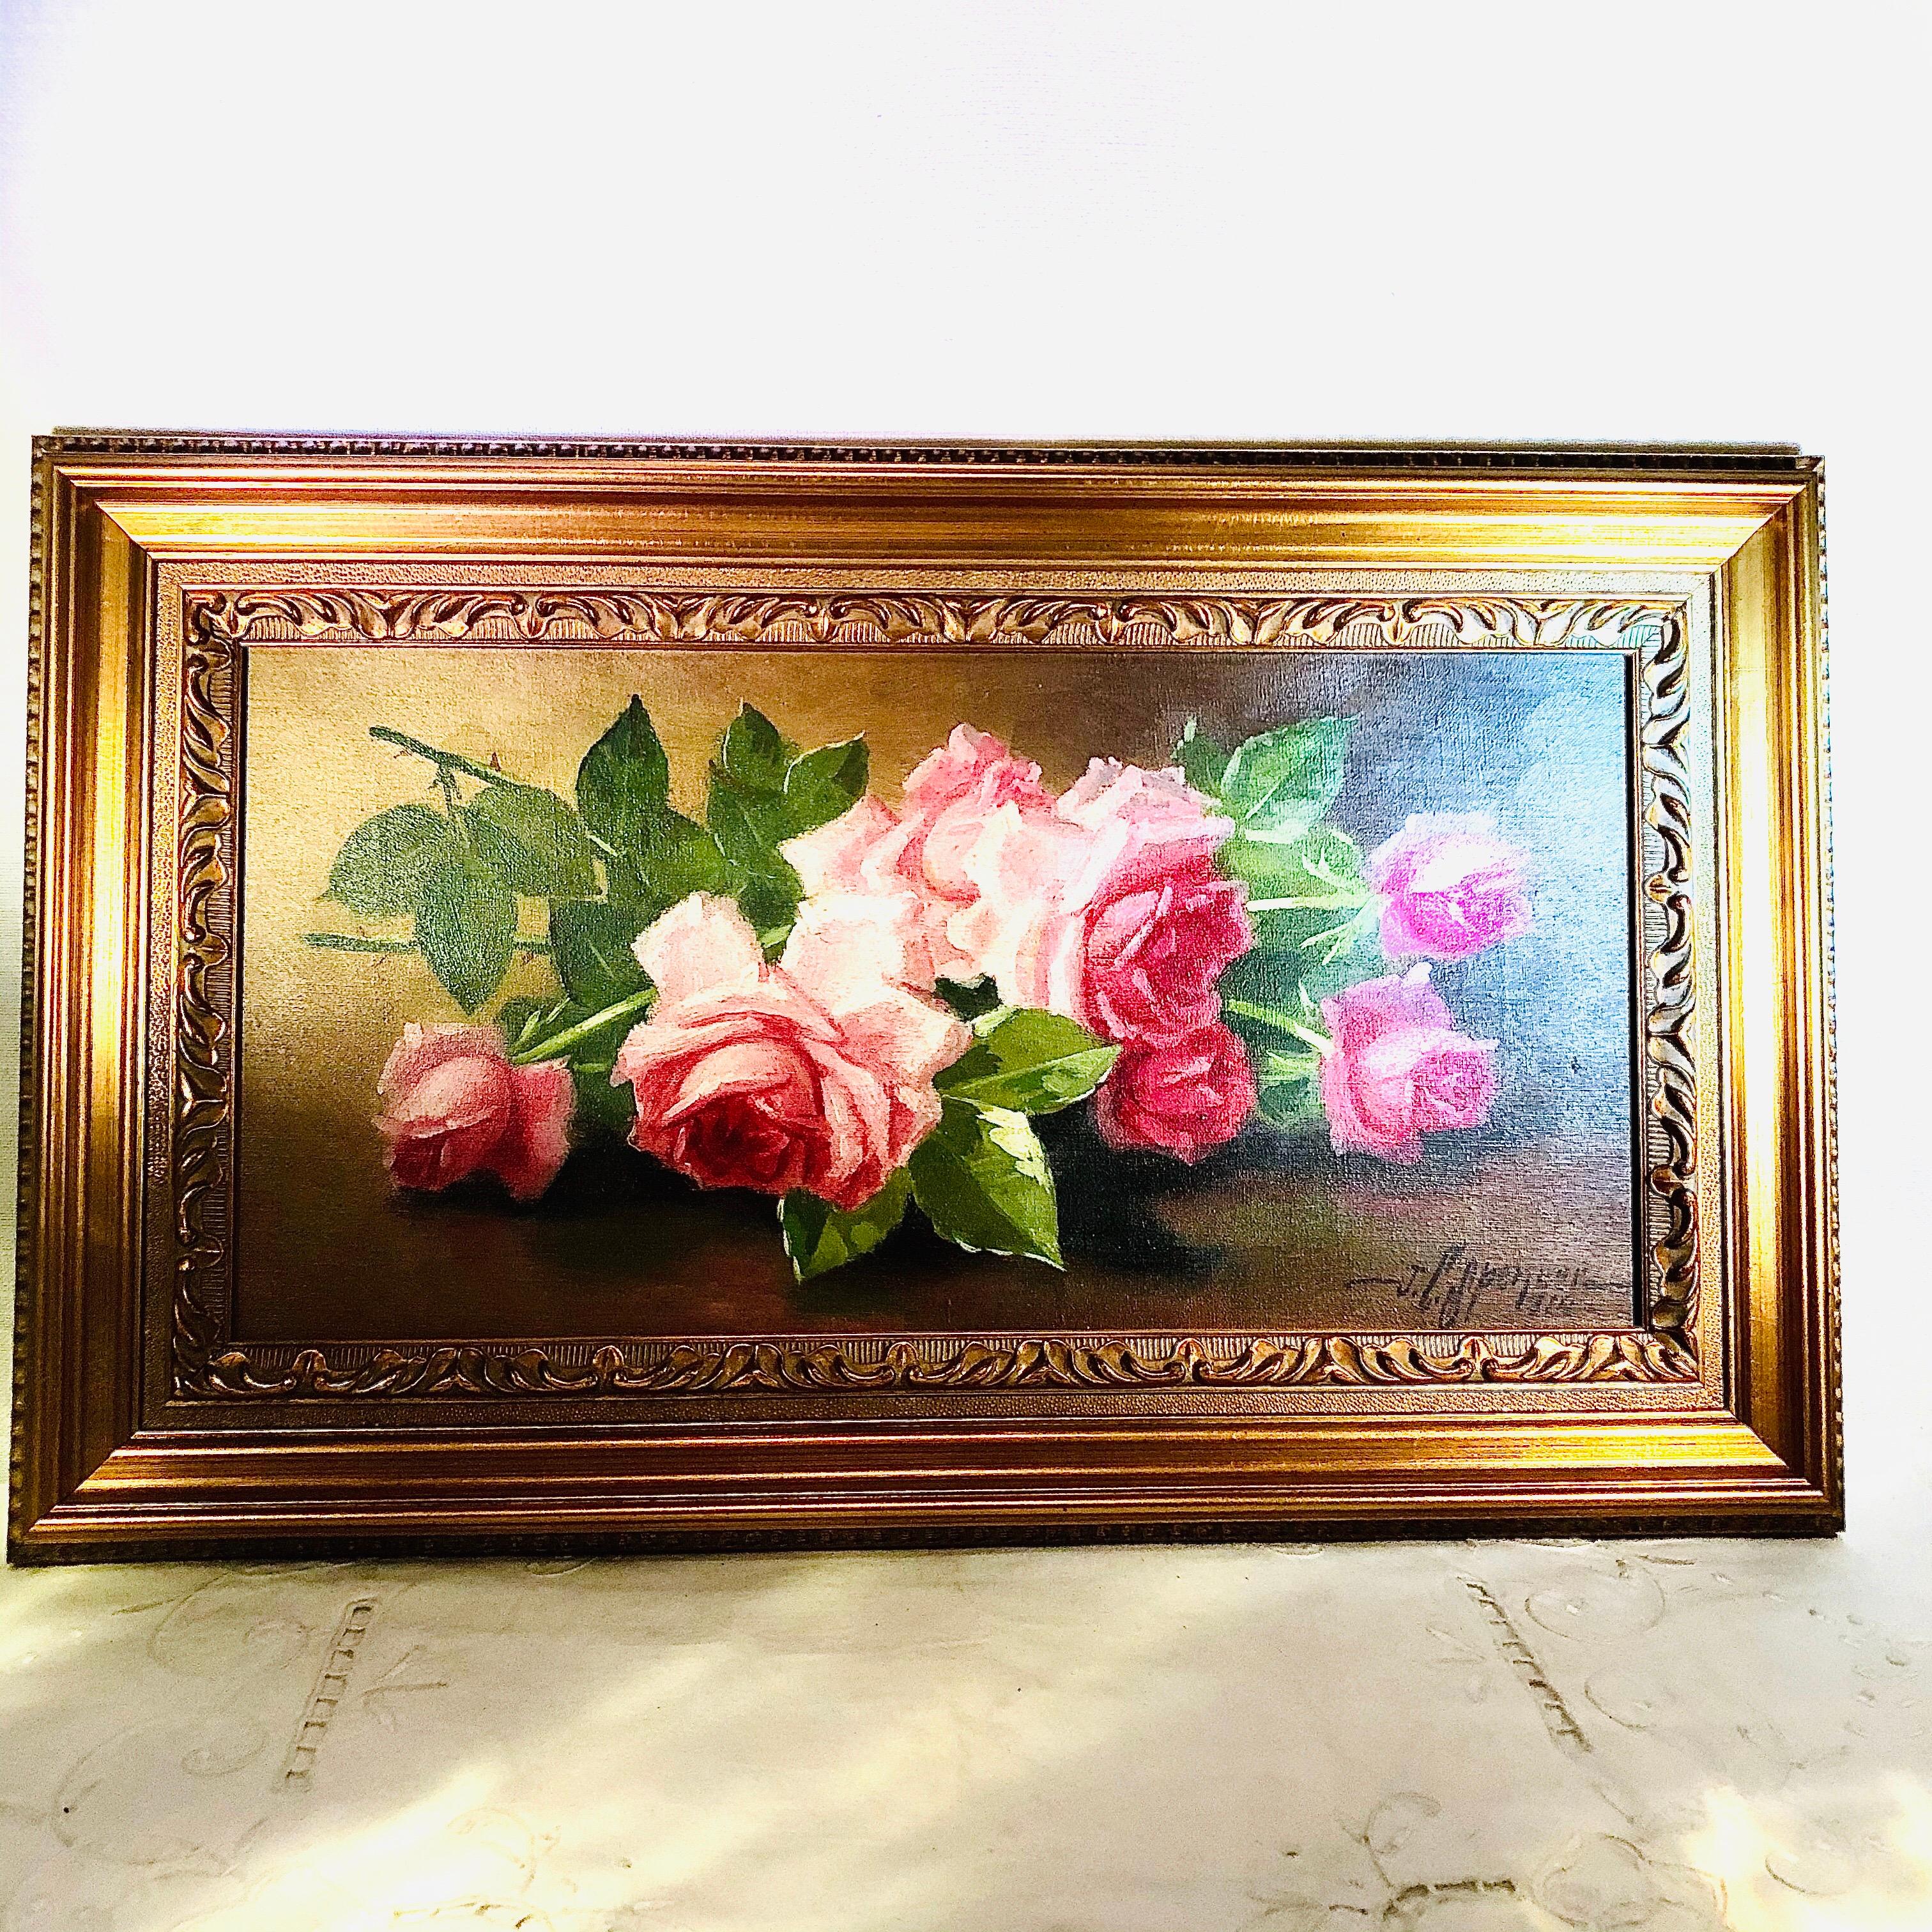 Romantic Oil on Canvas of Pink Roses Signed J. C. Spencer and Dated 1916